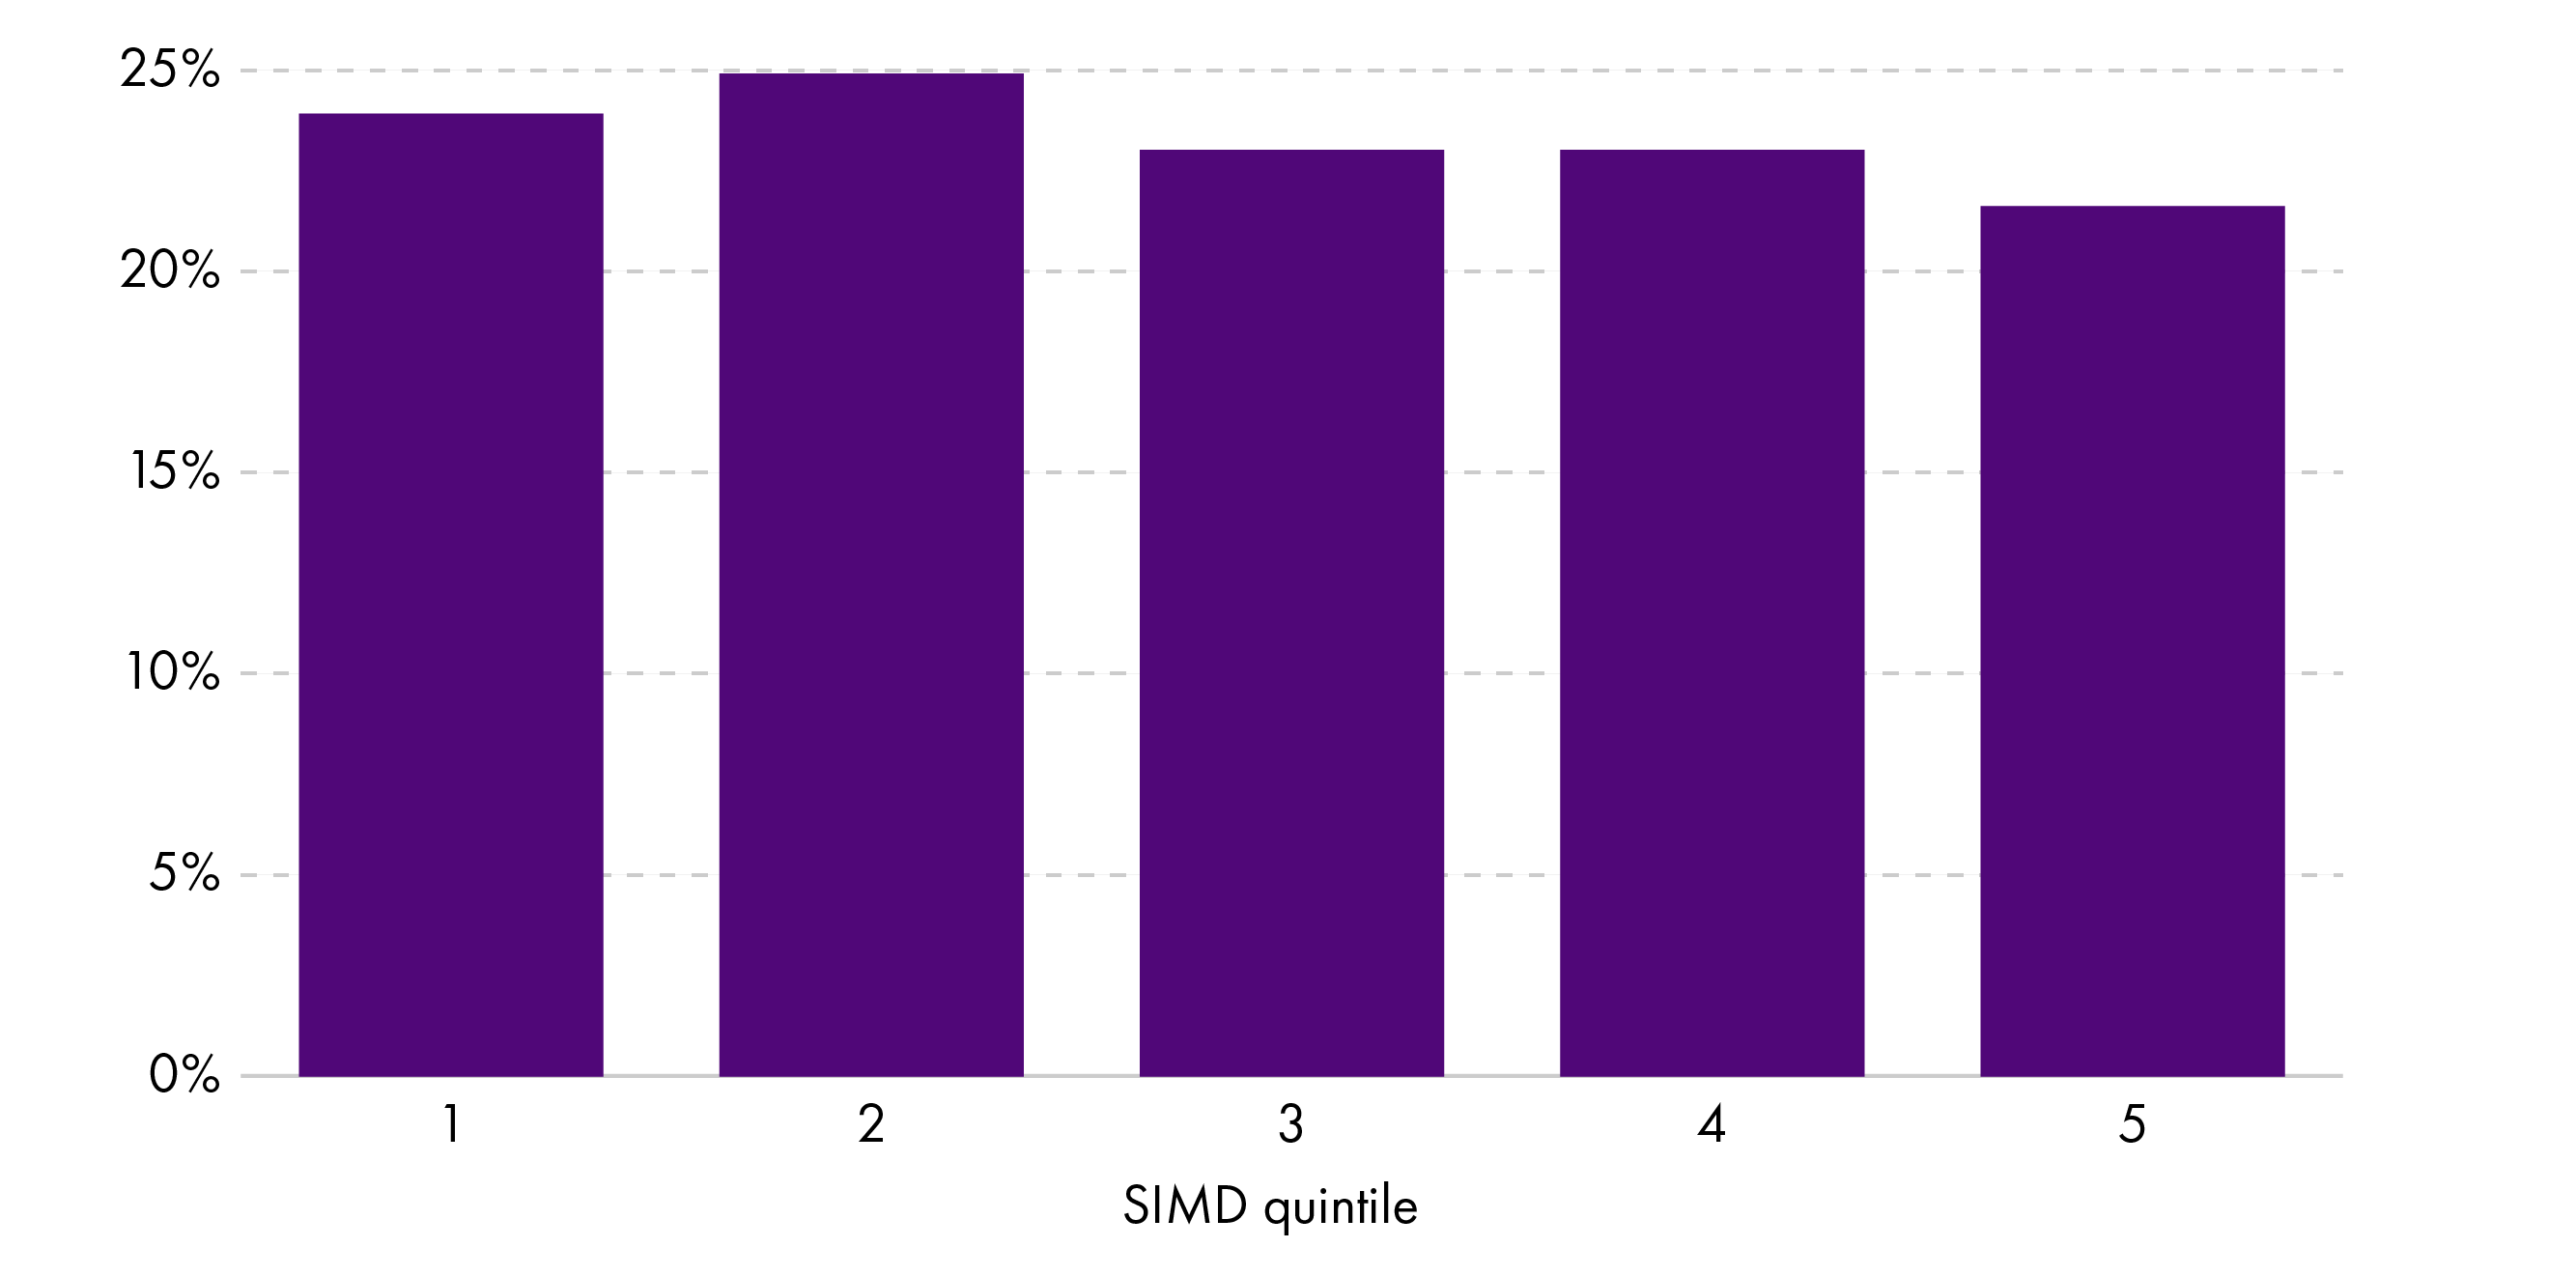 Graph showing the percentage of referrals to CAMHS not accepted, by SIMD quintile (1-5).